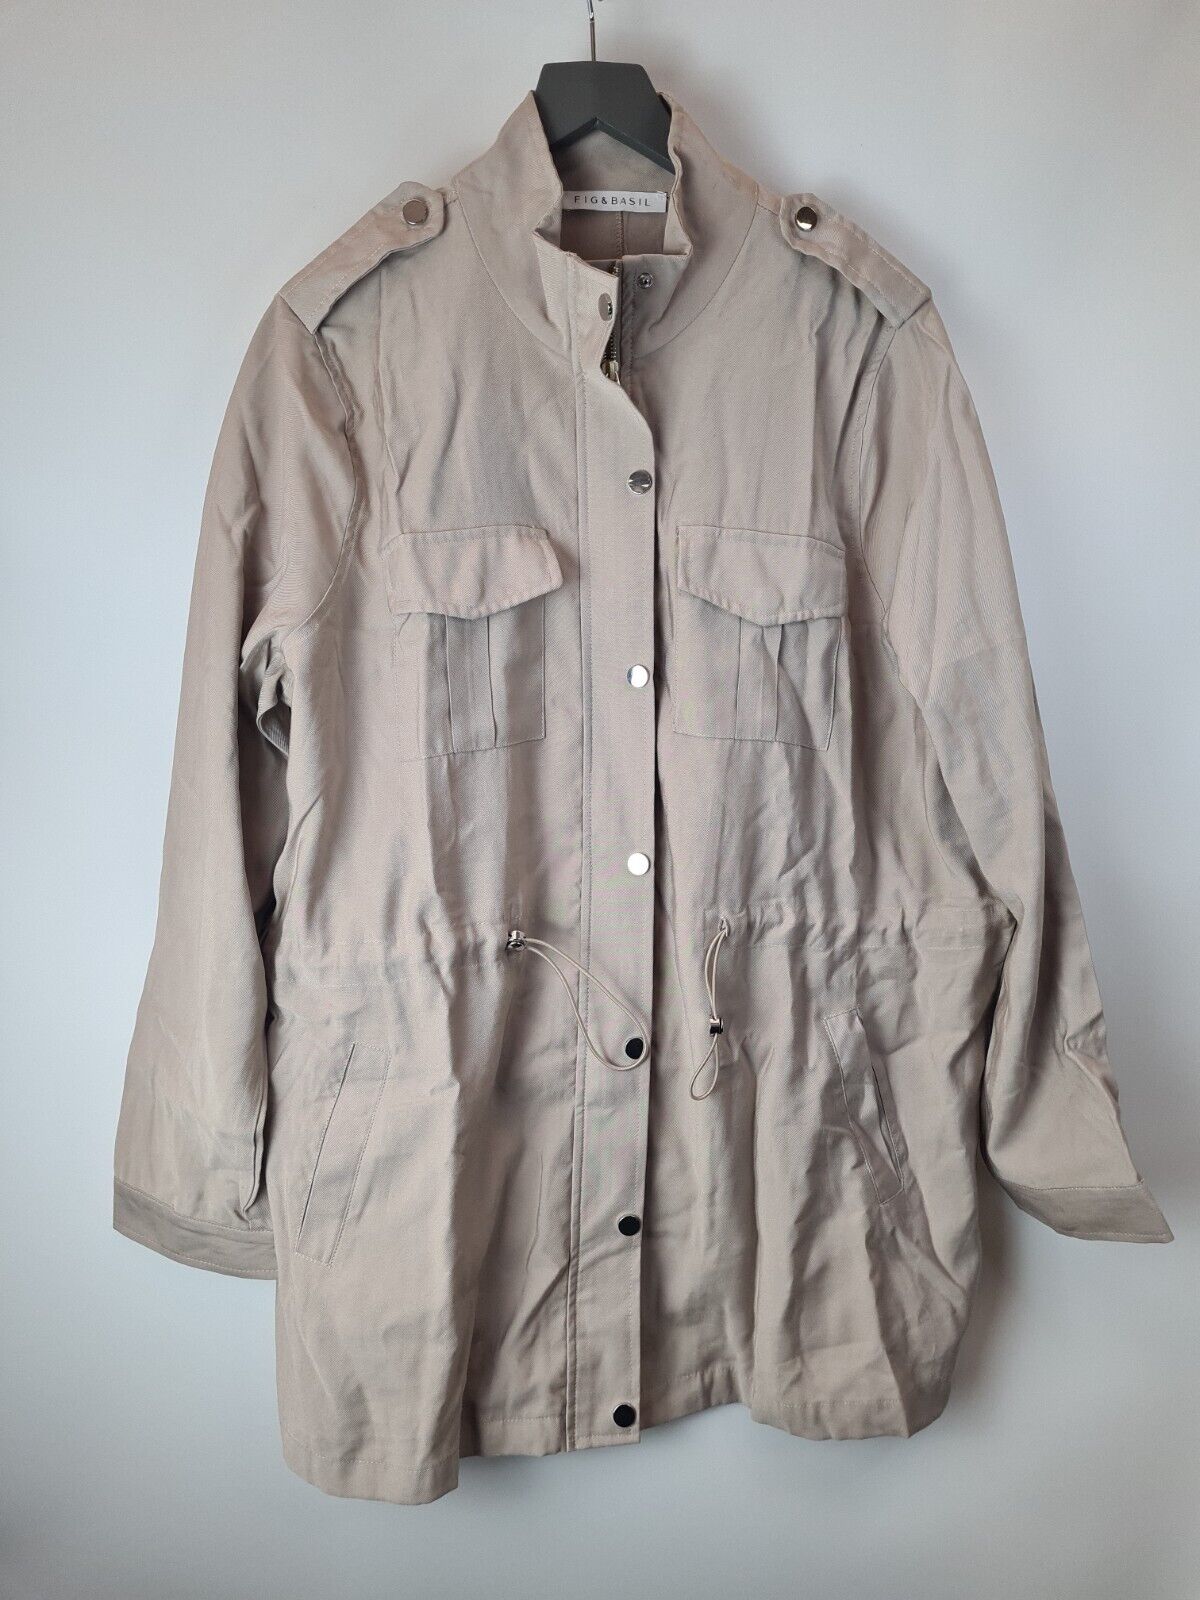 Fig And Basil Casual Military Jacket - Stone Size 12 **** V288